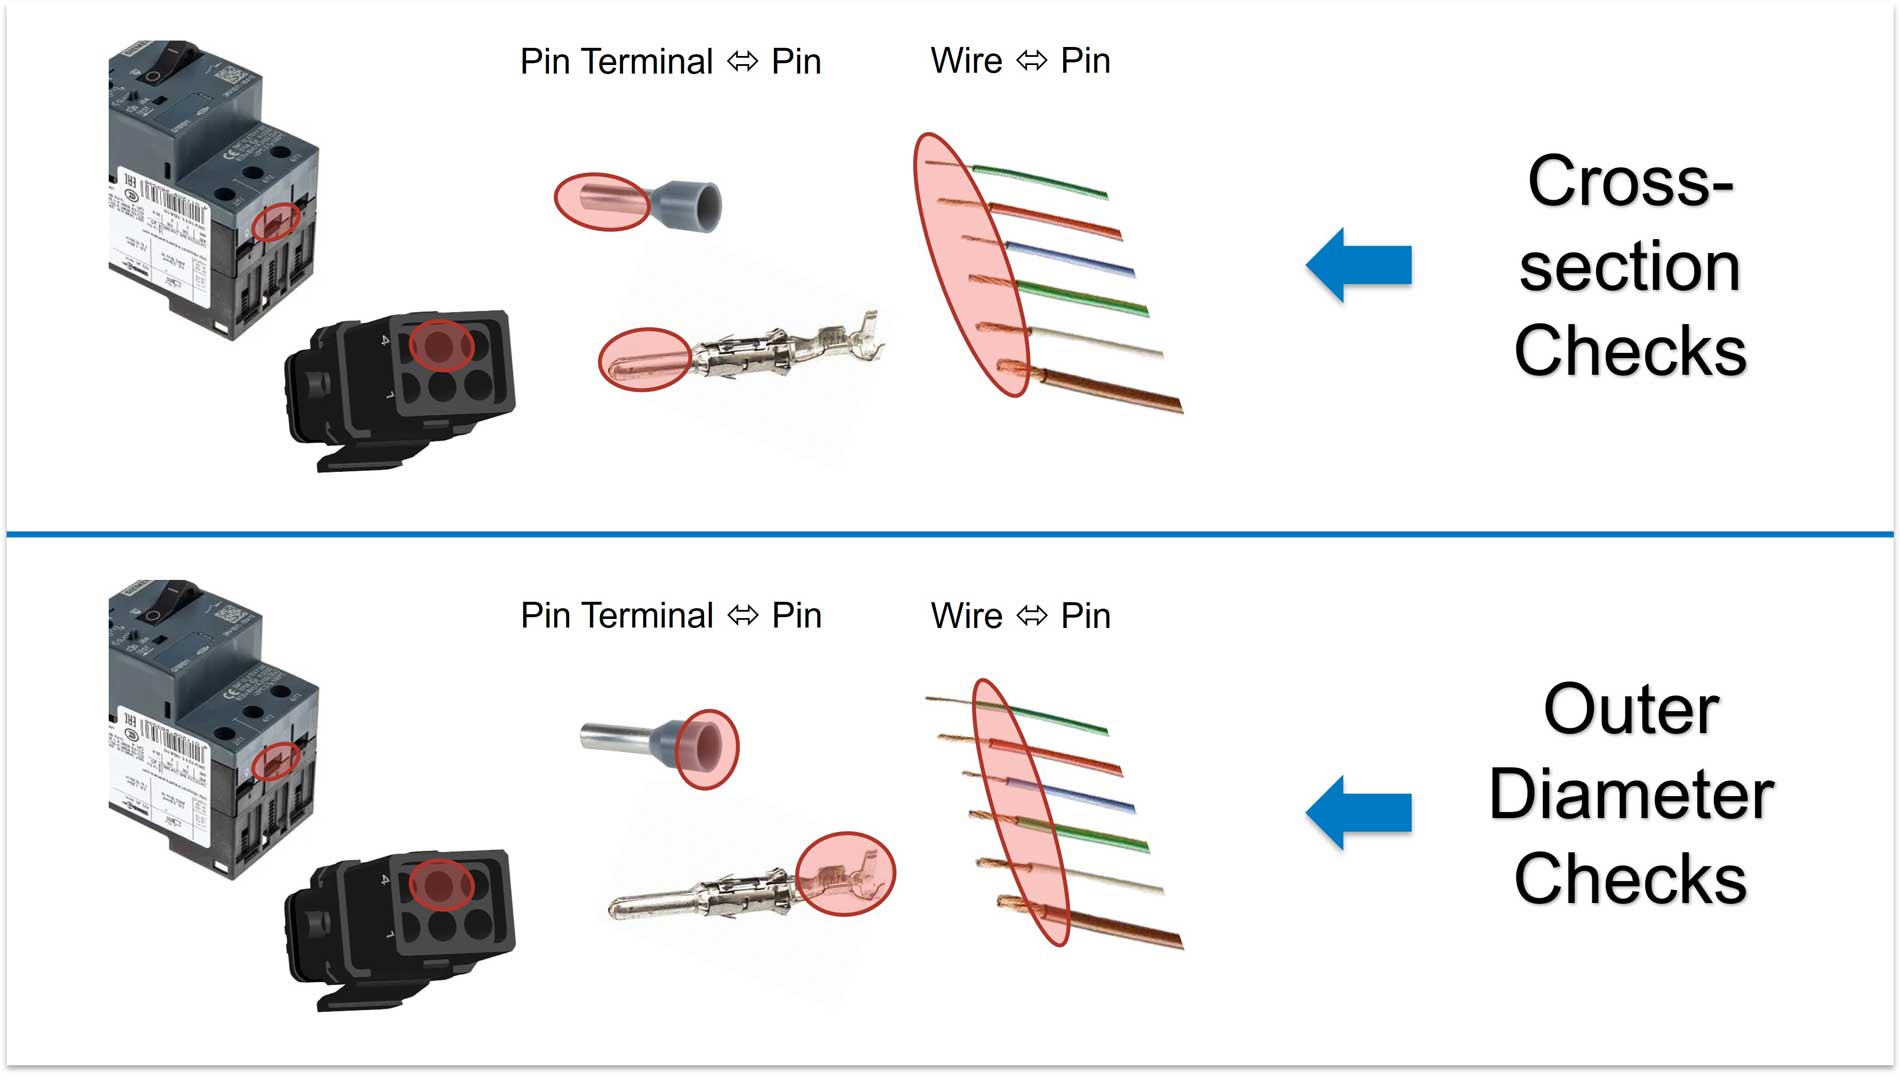 An illustration showing the design checks performed in E3.series 2023 for connecting wires and pin terminals.